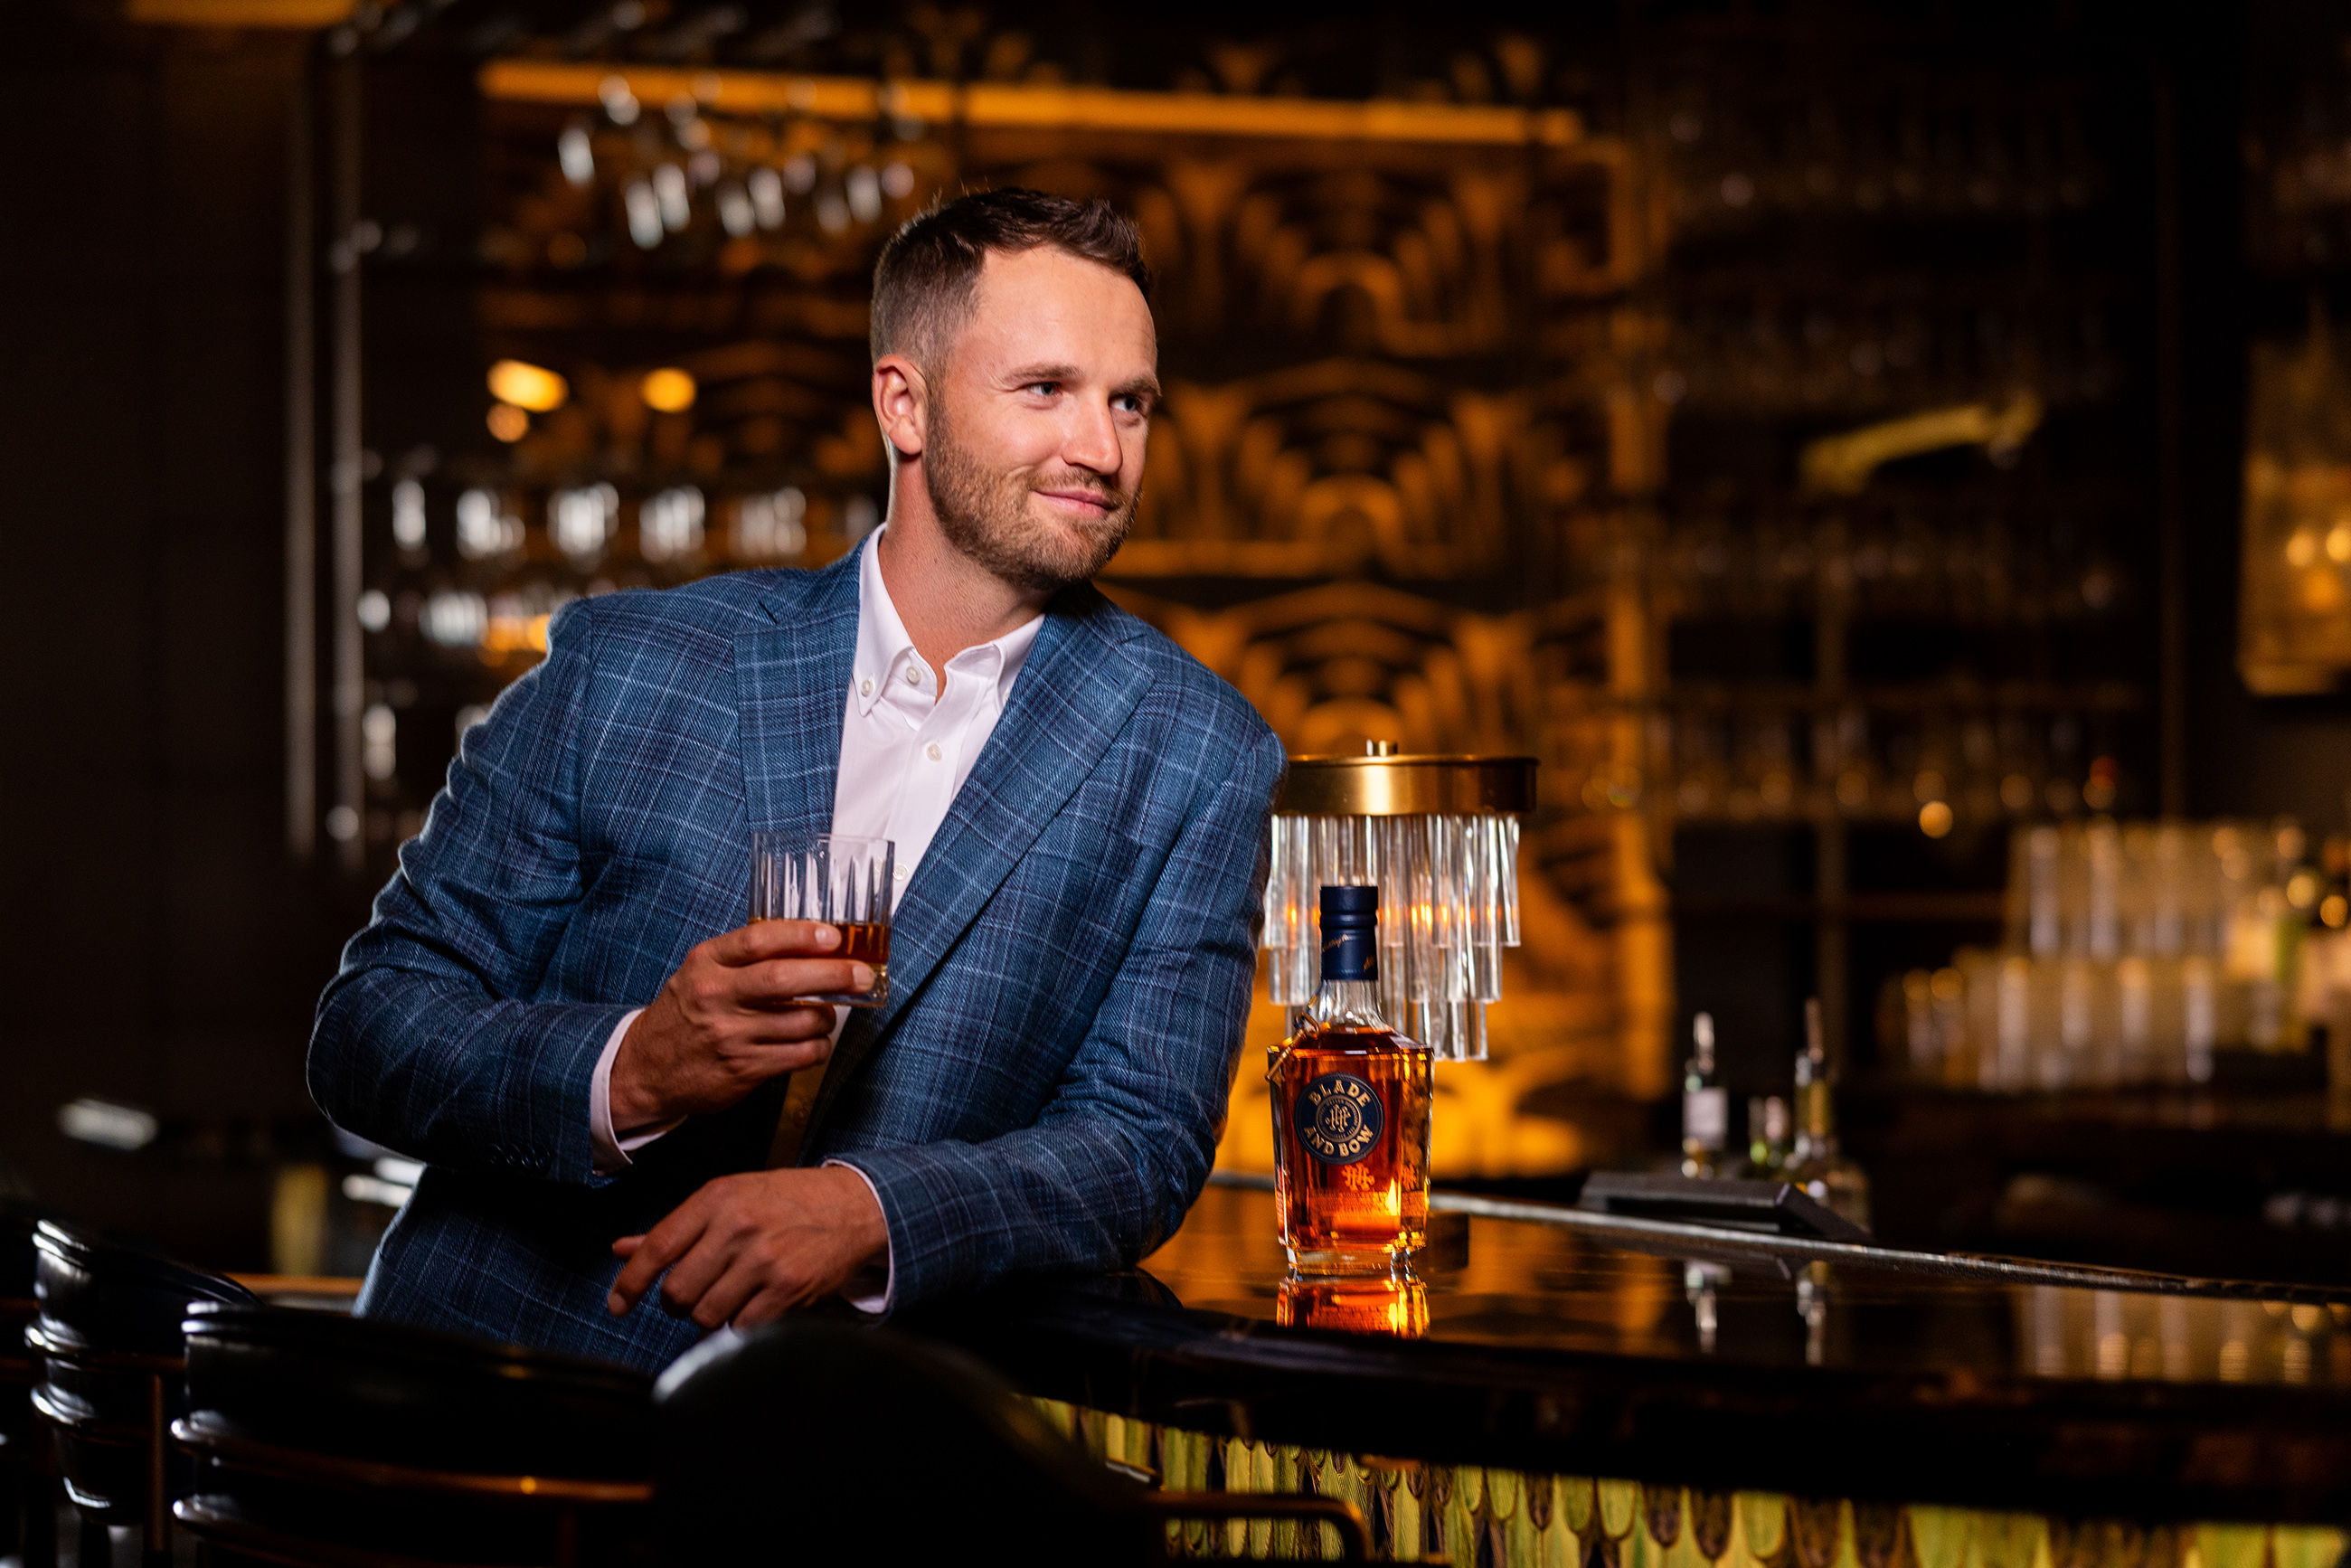 Professional golfer and whiskey-lover Wyndham Clark celebrates a round of golf with a Blade and Bow Kentucky Straight Bourbon cocktail at the 19th hole clubhouse in his hometown of Phoenix, Arizona on February 28.